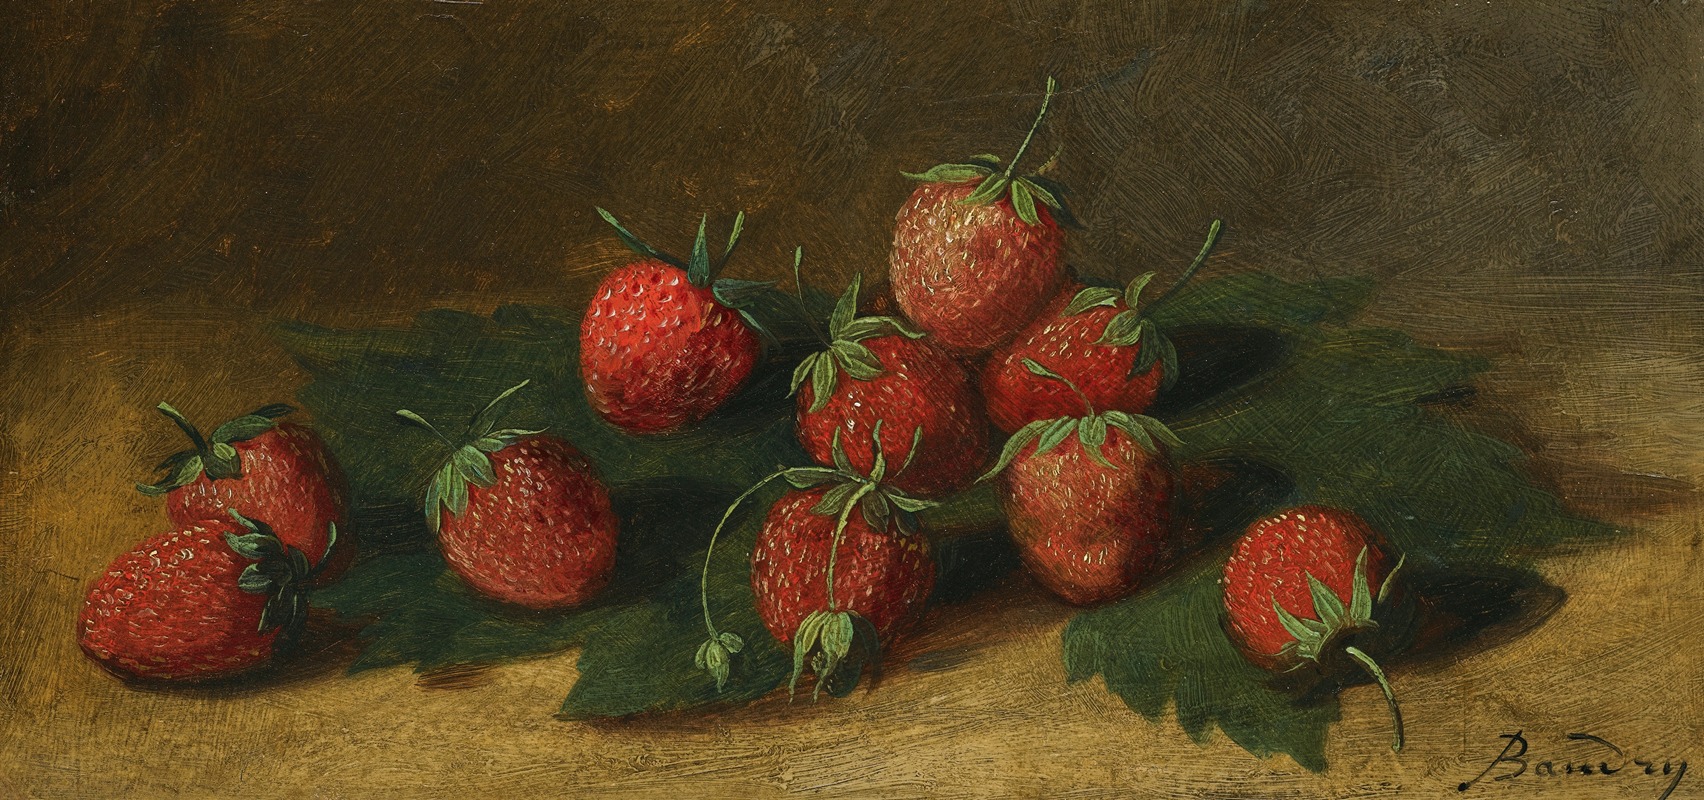 Paul-Jacques-Aimé Baudry - Study Of Strawberries